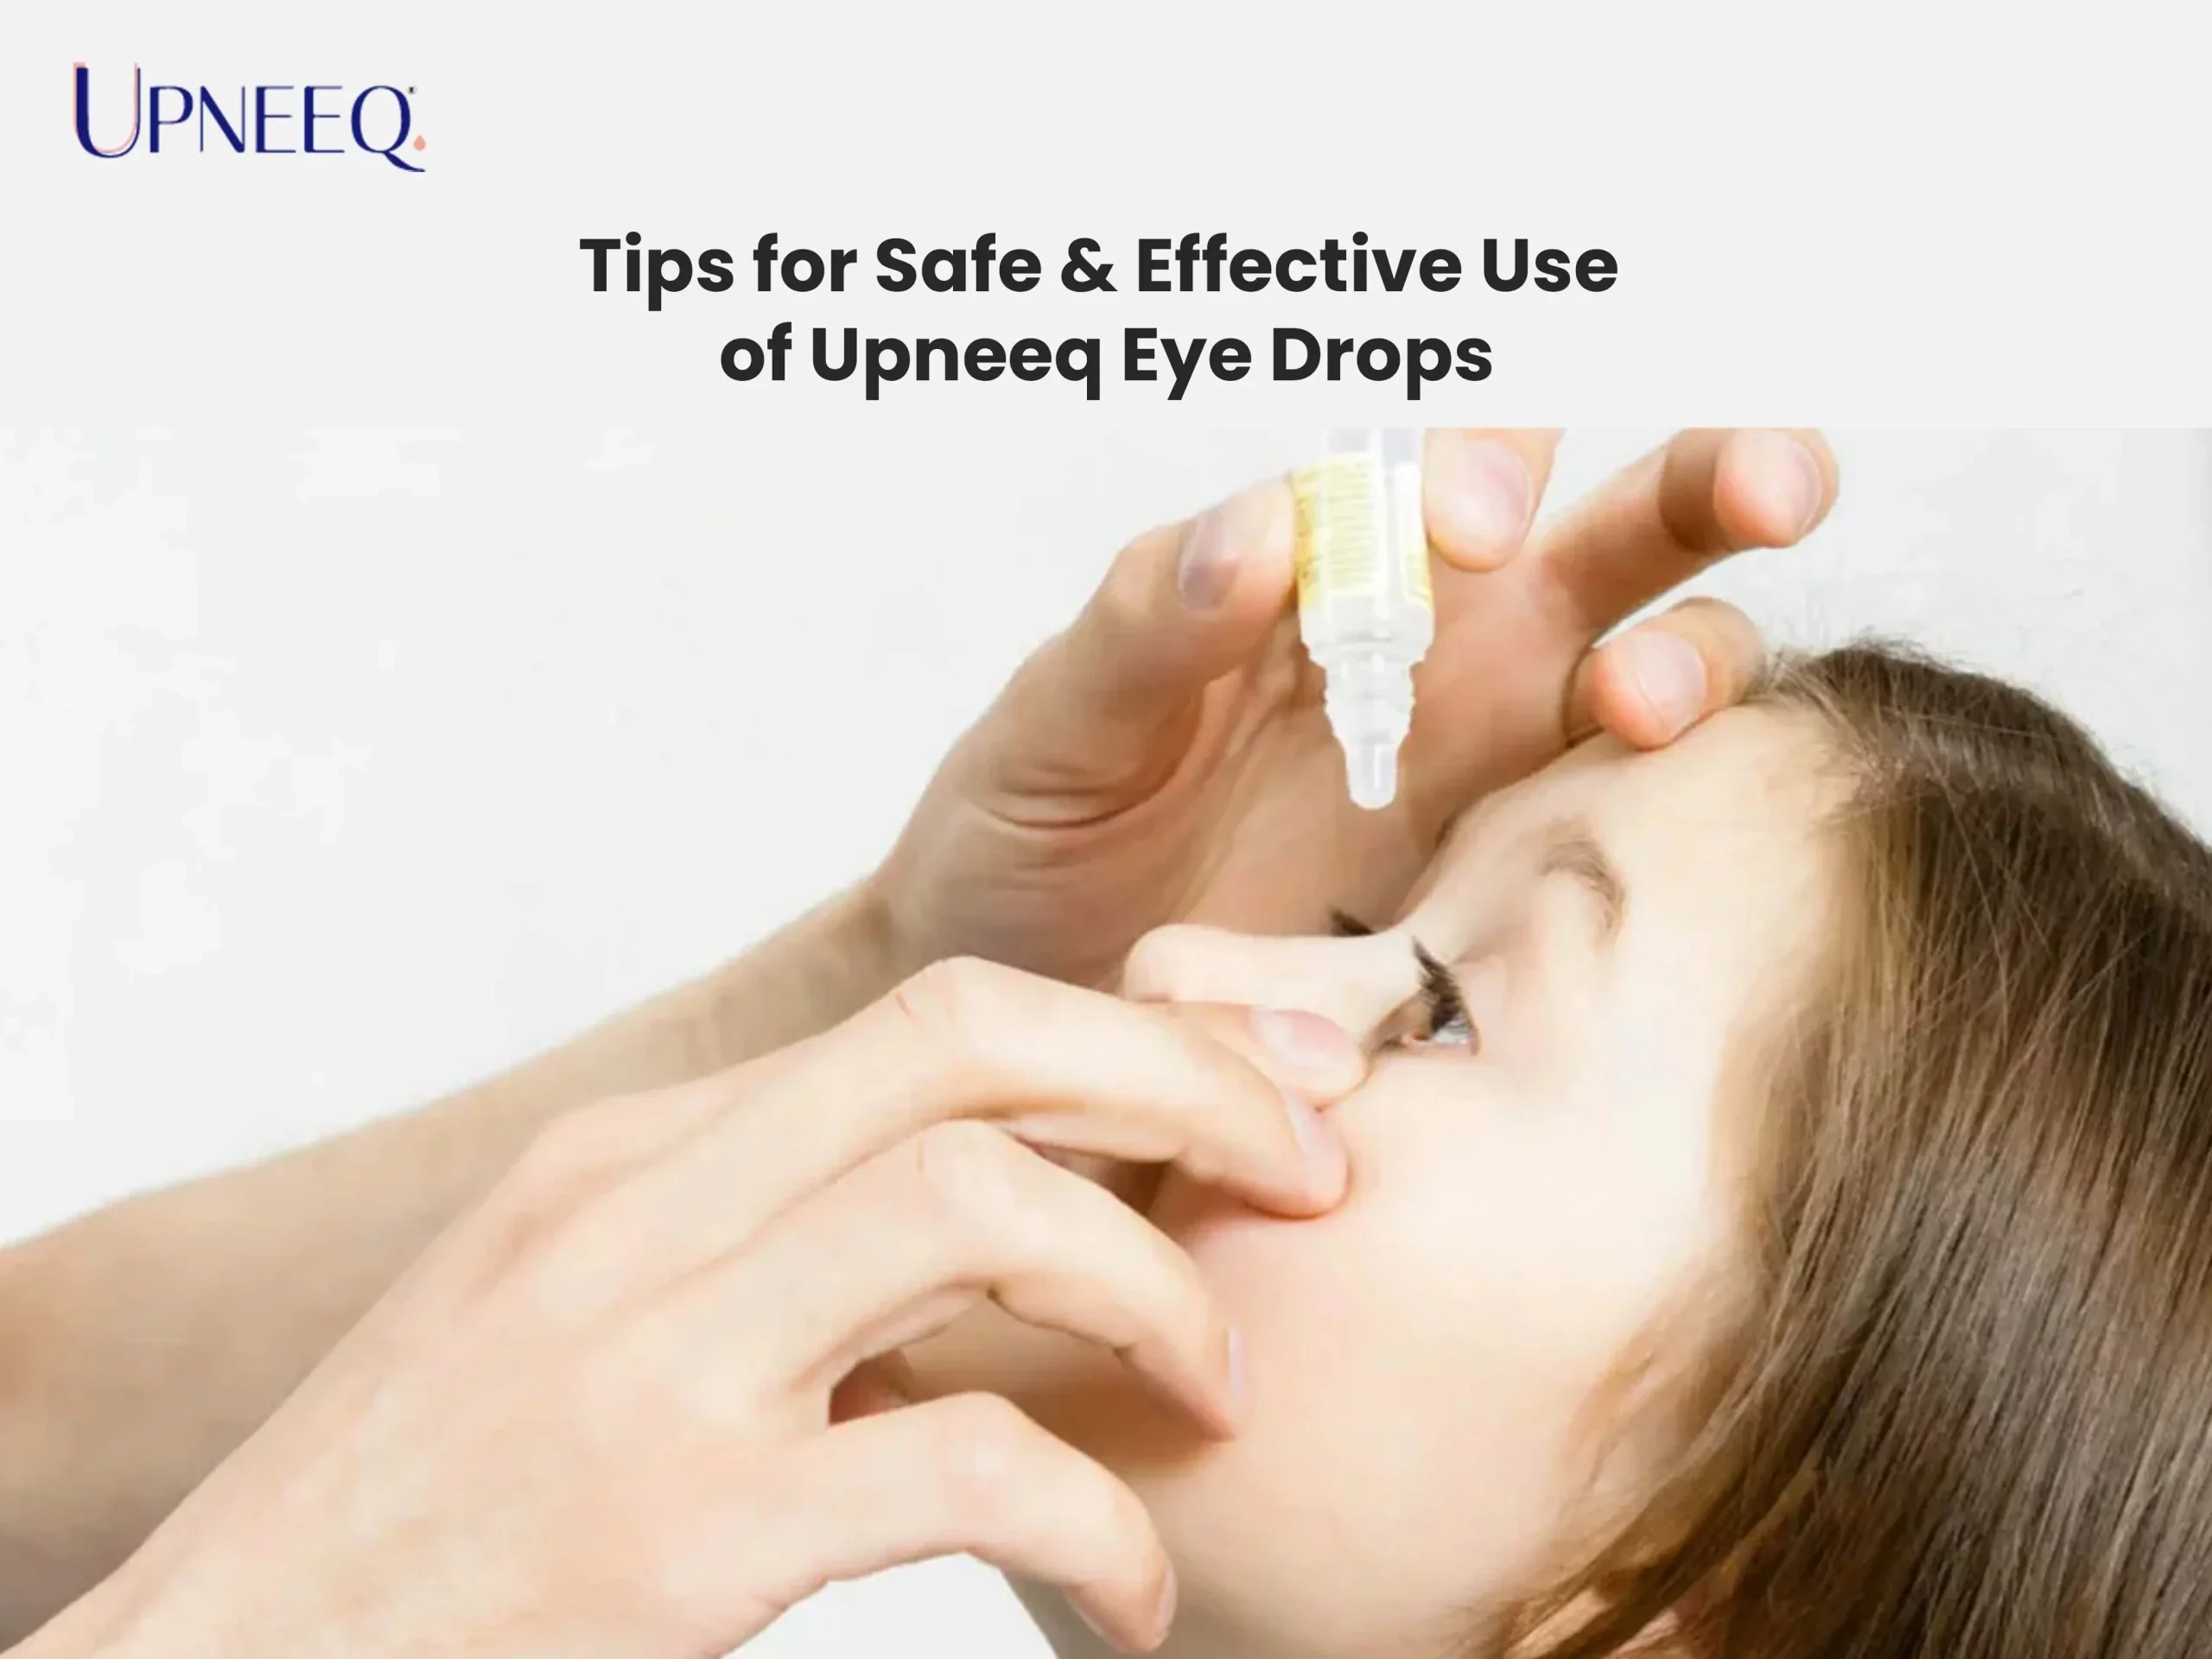 Tips for Safe & Effective Use of Upneeq Eye Drops